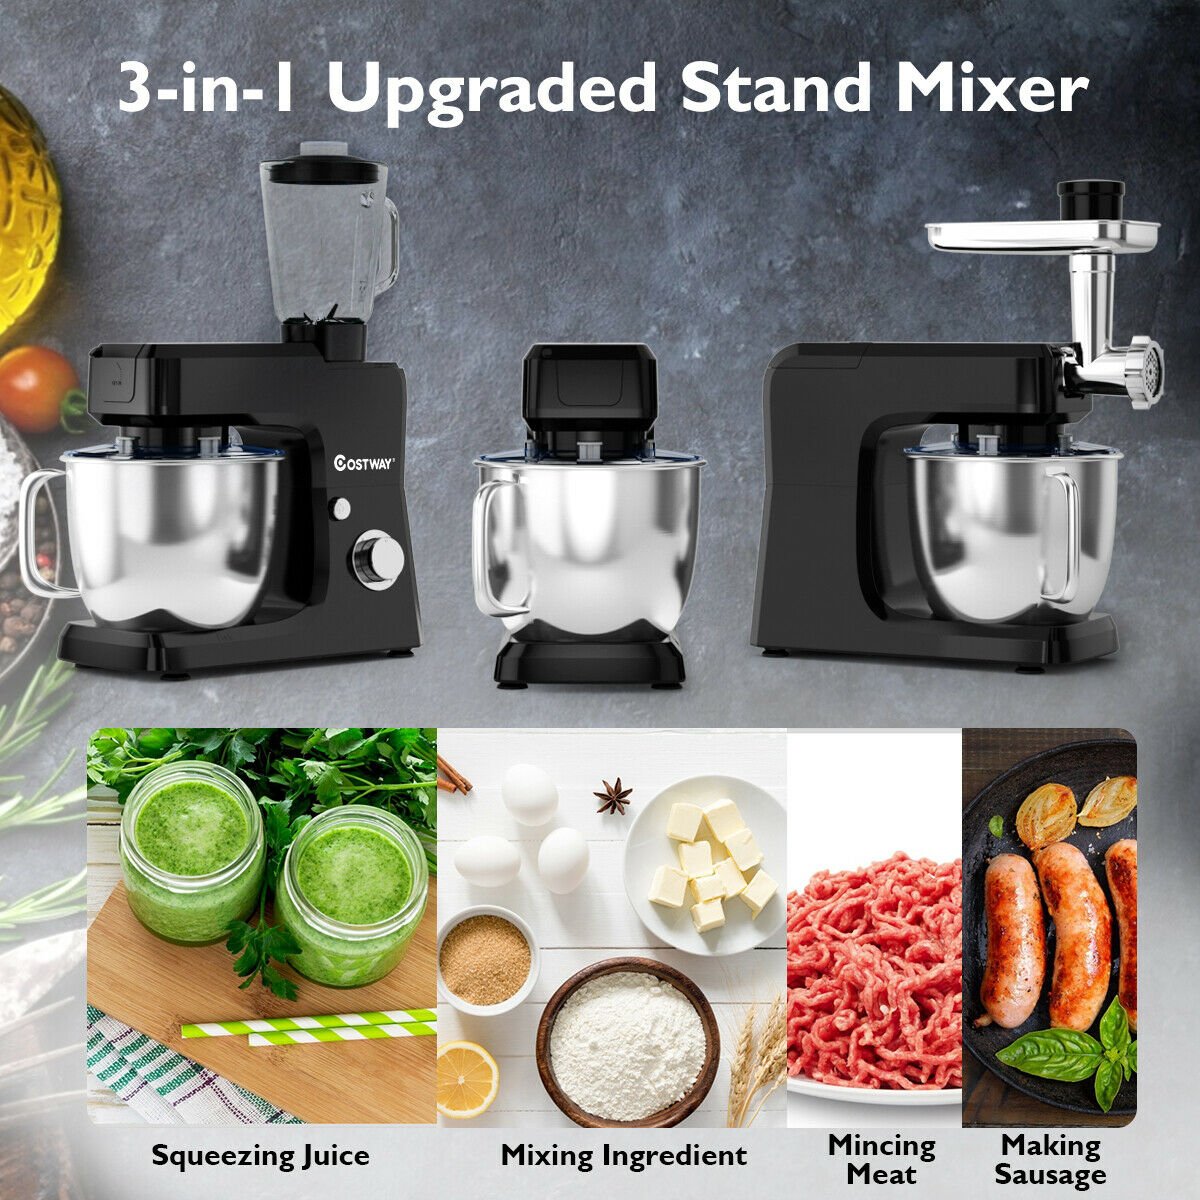 3-in-1 Multi-functional 6-speed Tilt-head Food Stand Mixer, Black - Gallery Canada